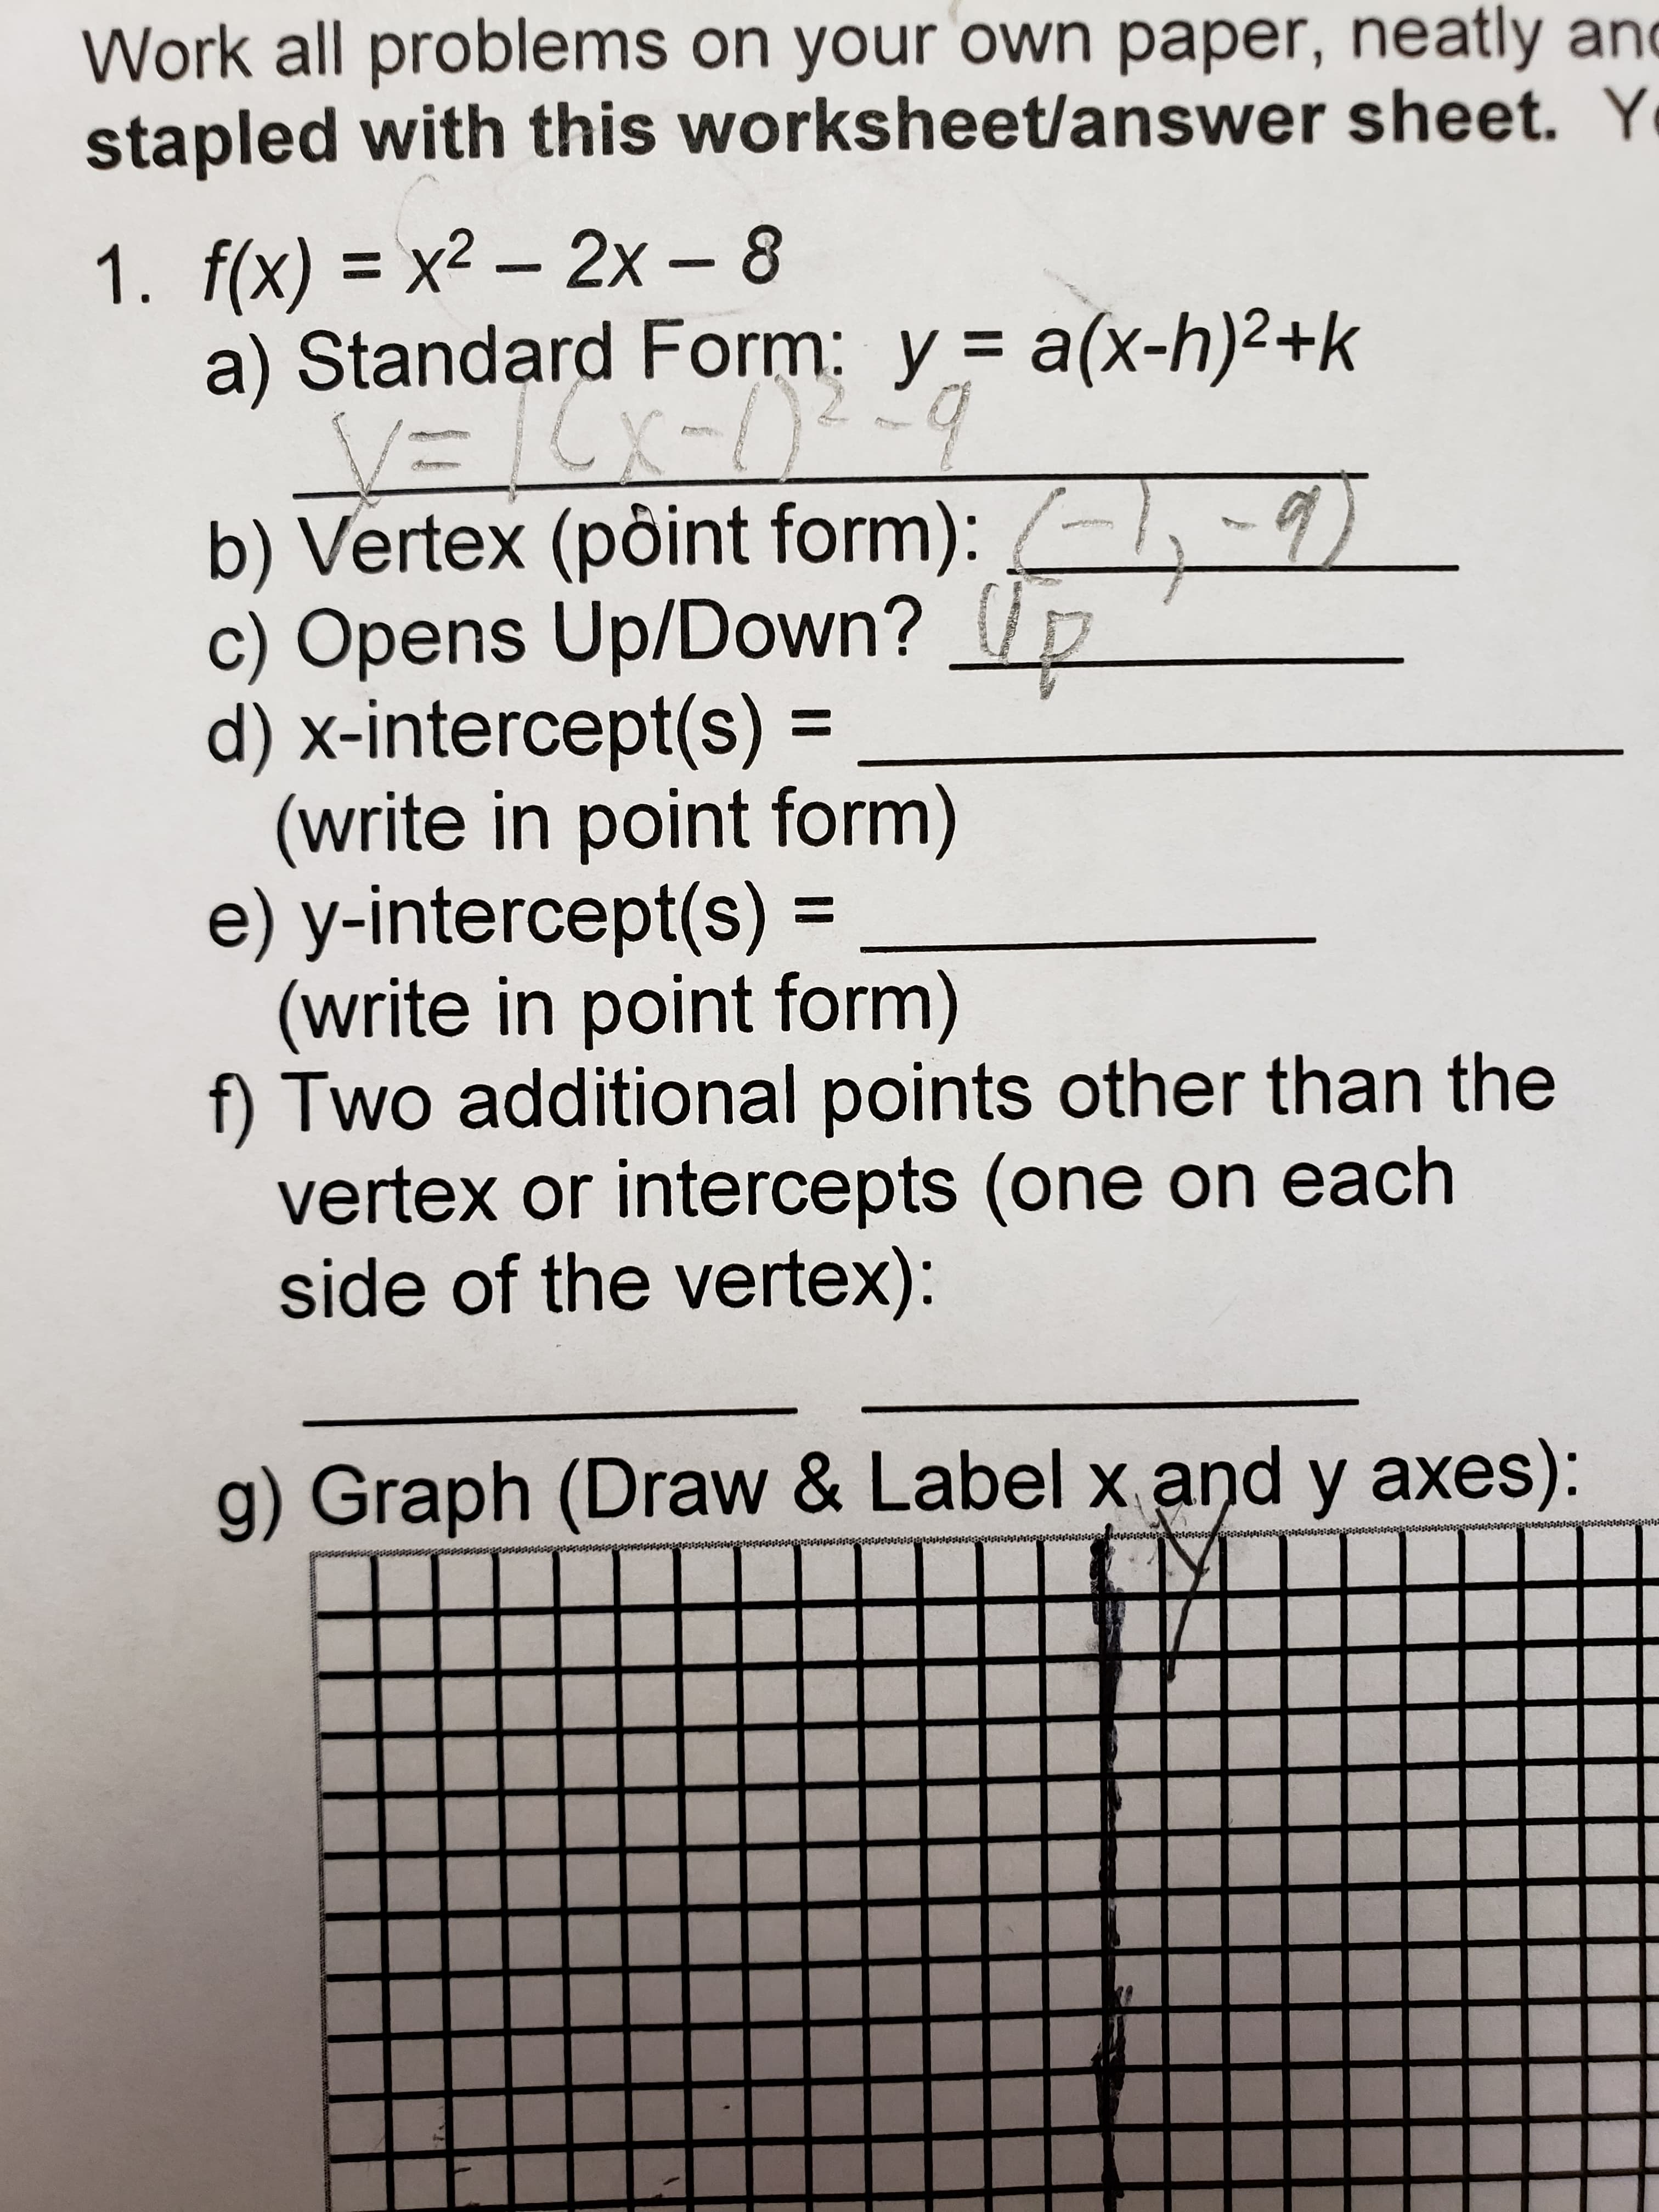 Work all problems on your own paper, neatly and
stapled with this worksheet/answer sheet. Y
1. f(x) = x² – 2x – 8
a) Standard Form: y = a(x-h)2+k
V=ICx=)9
b) Vertex (pôint form): -9)
c) Opens Up/Down?
d) x-intercept(s) =
(write in point form)
e) y-intercept(s) =
(write in point form)
f) Two additional points other than the
vertex or intercepts (one on each
side of the vertex):
%3D
%3D
%3|
g) Graph (Draw & Label x and y axes):
